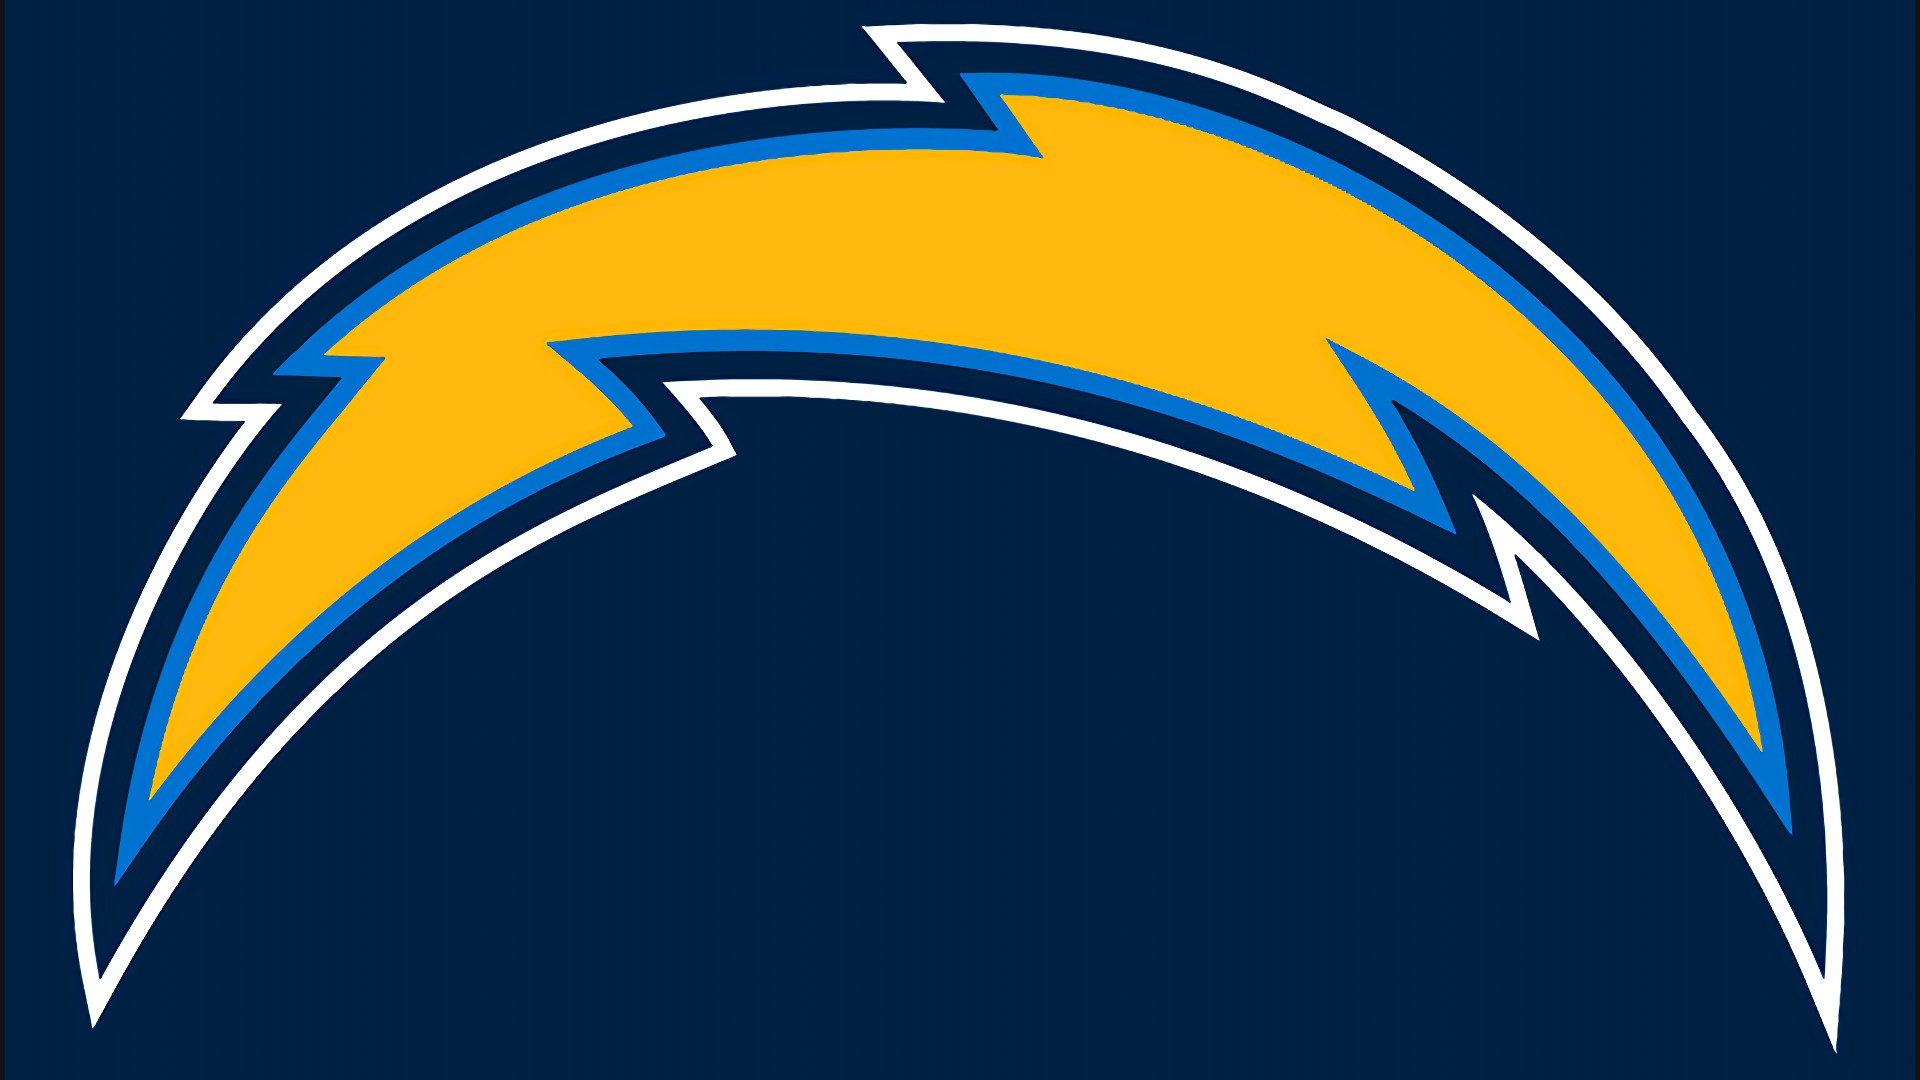 chargers wallpaper,logo,electric blue,graphics,symbol